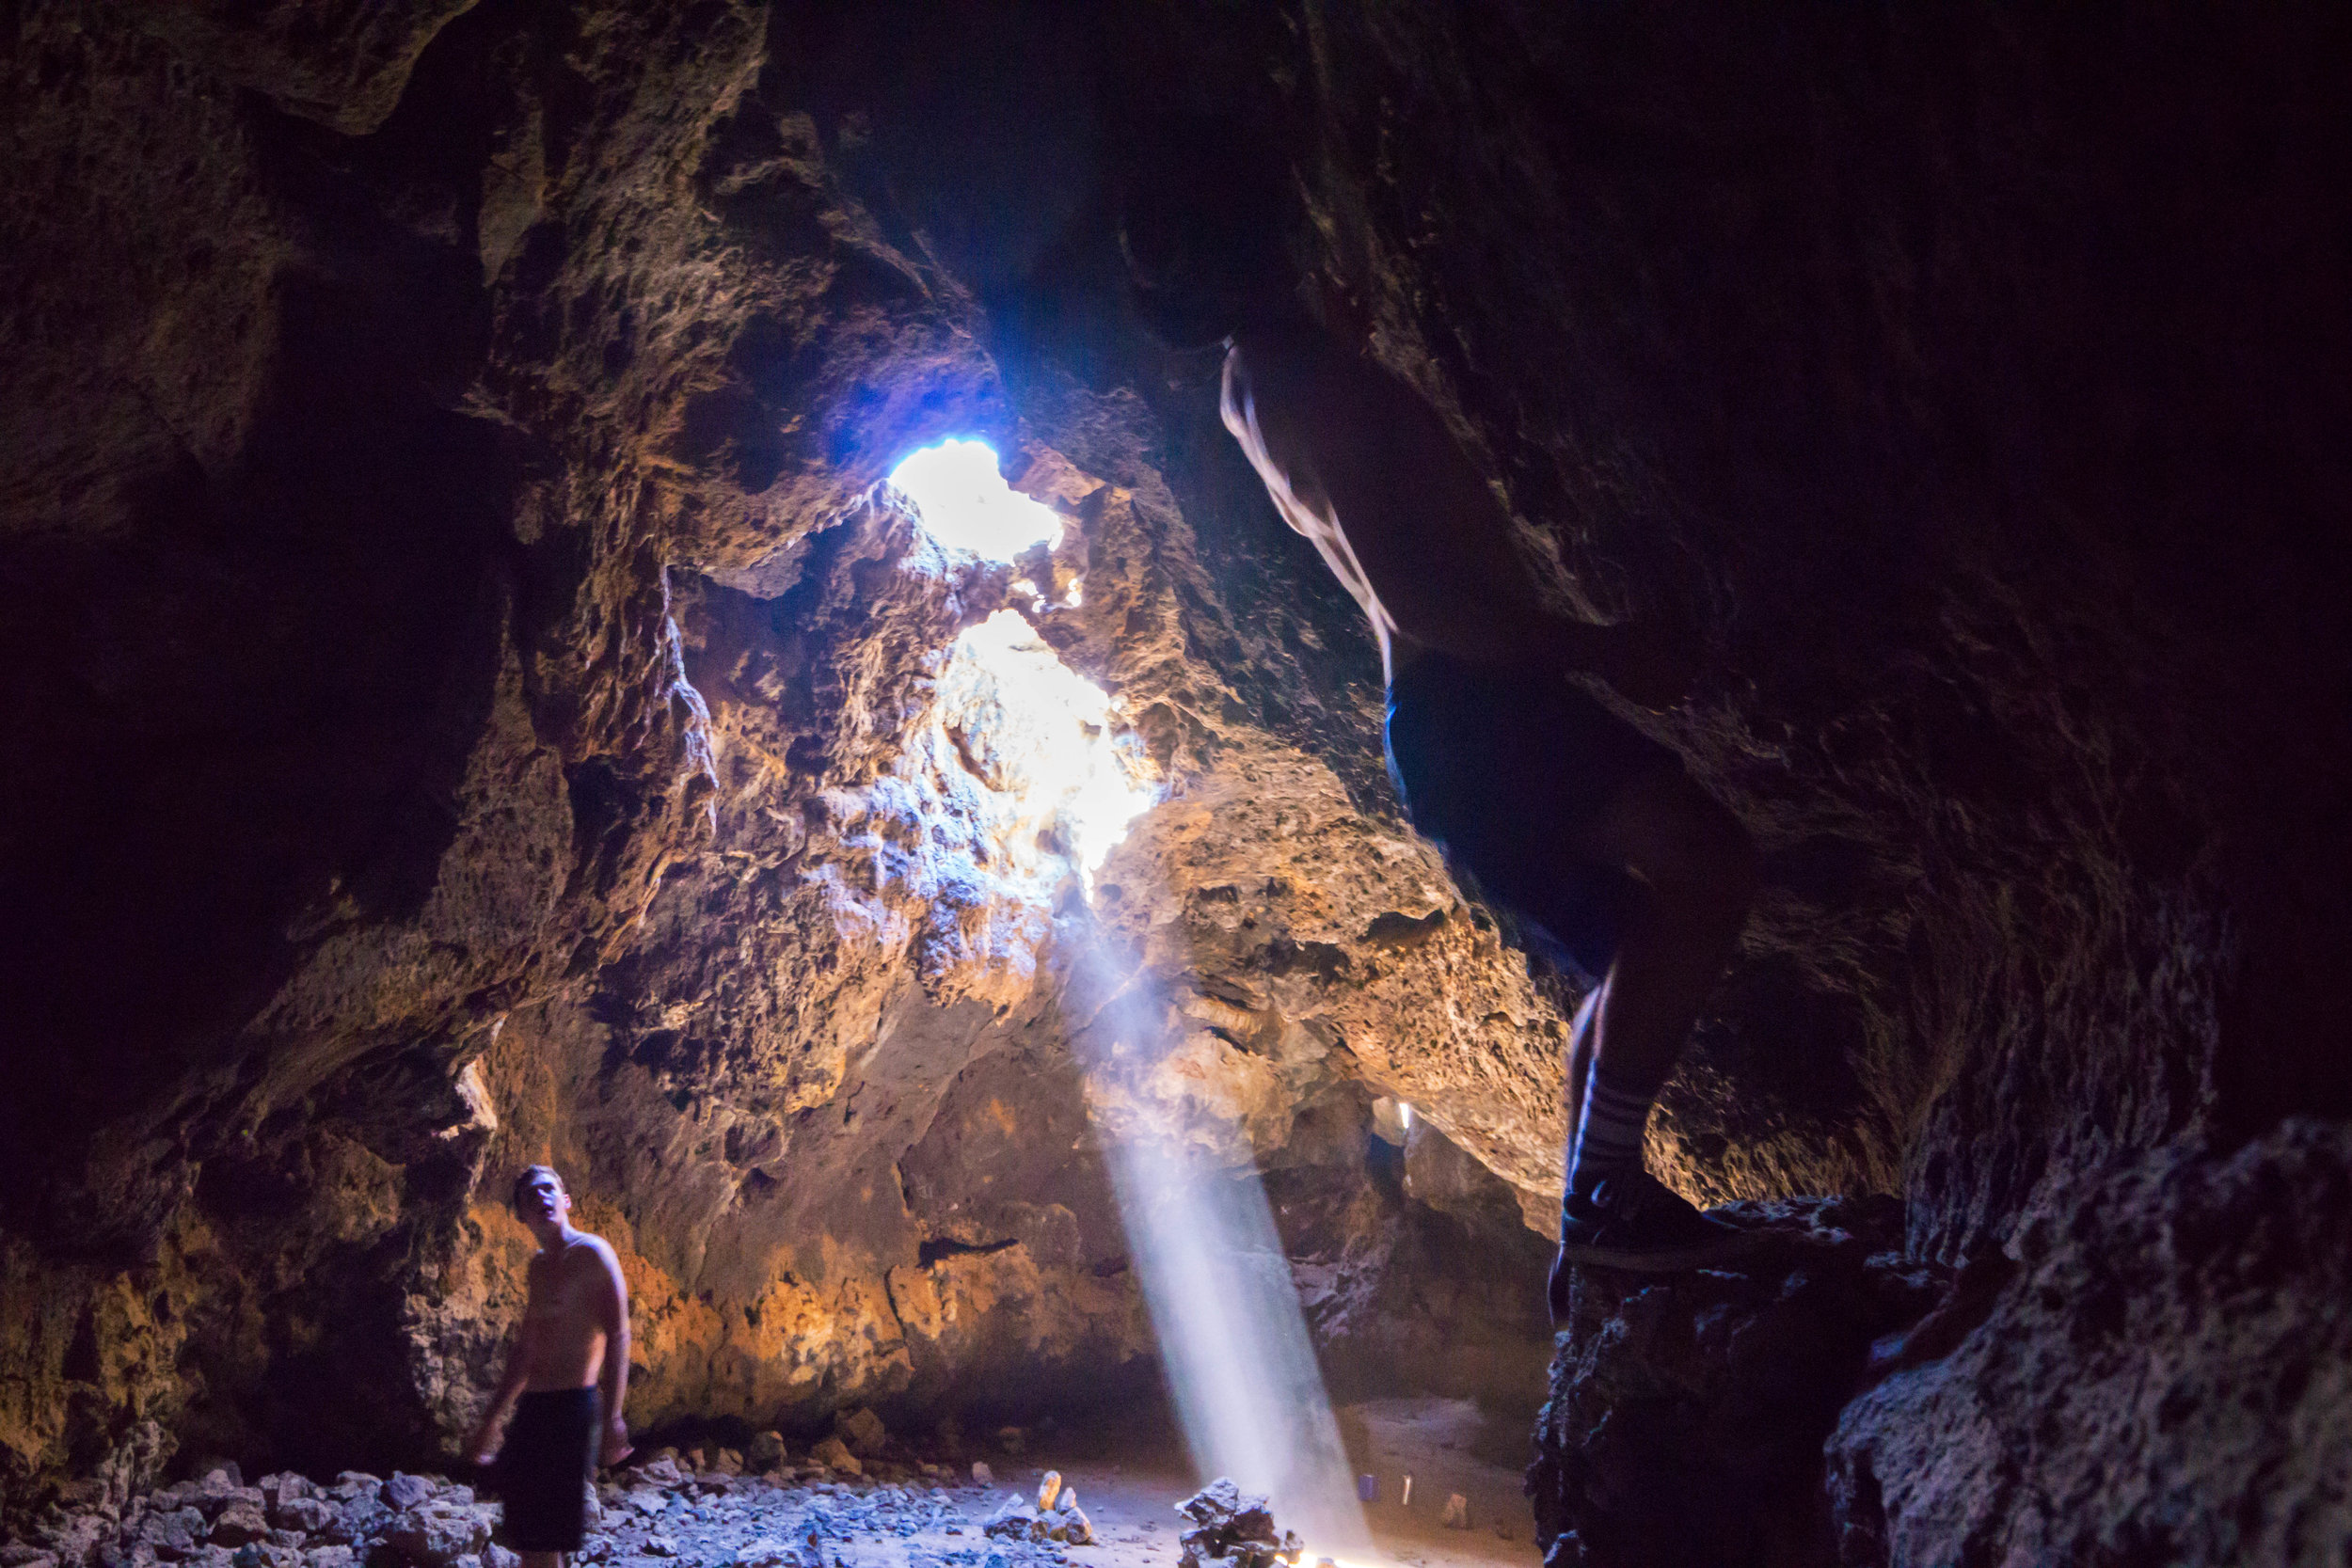 Made it to the underworld! At 30 degrees cooler, the lava tubes offer a safe haven from the scorching desert sun.